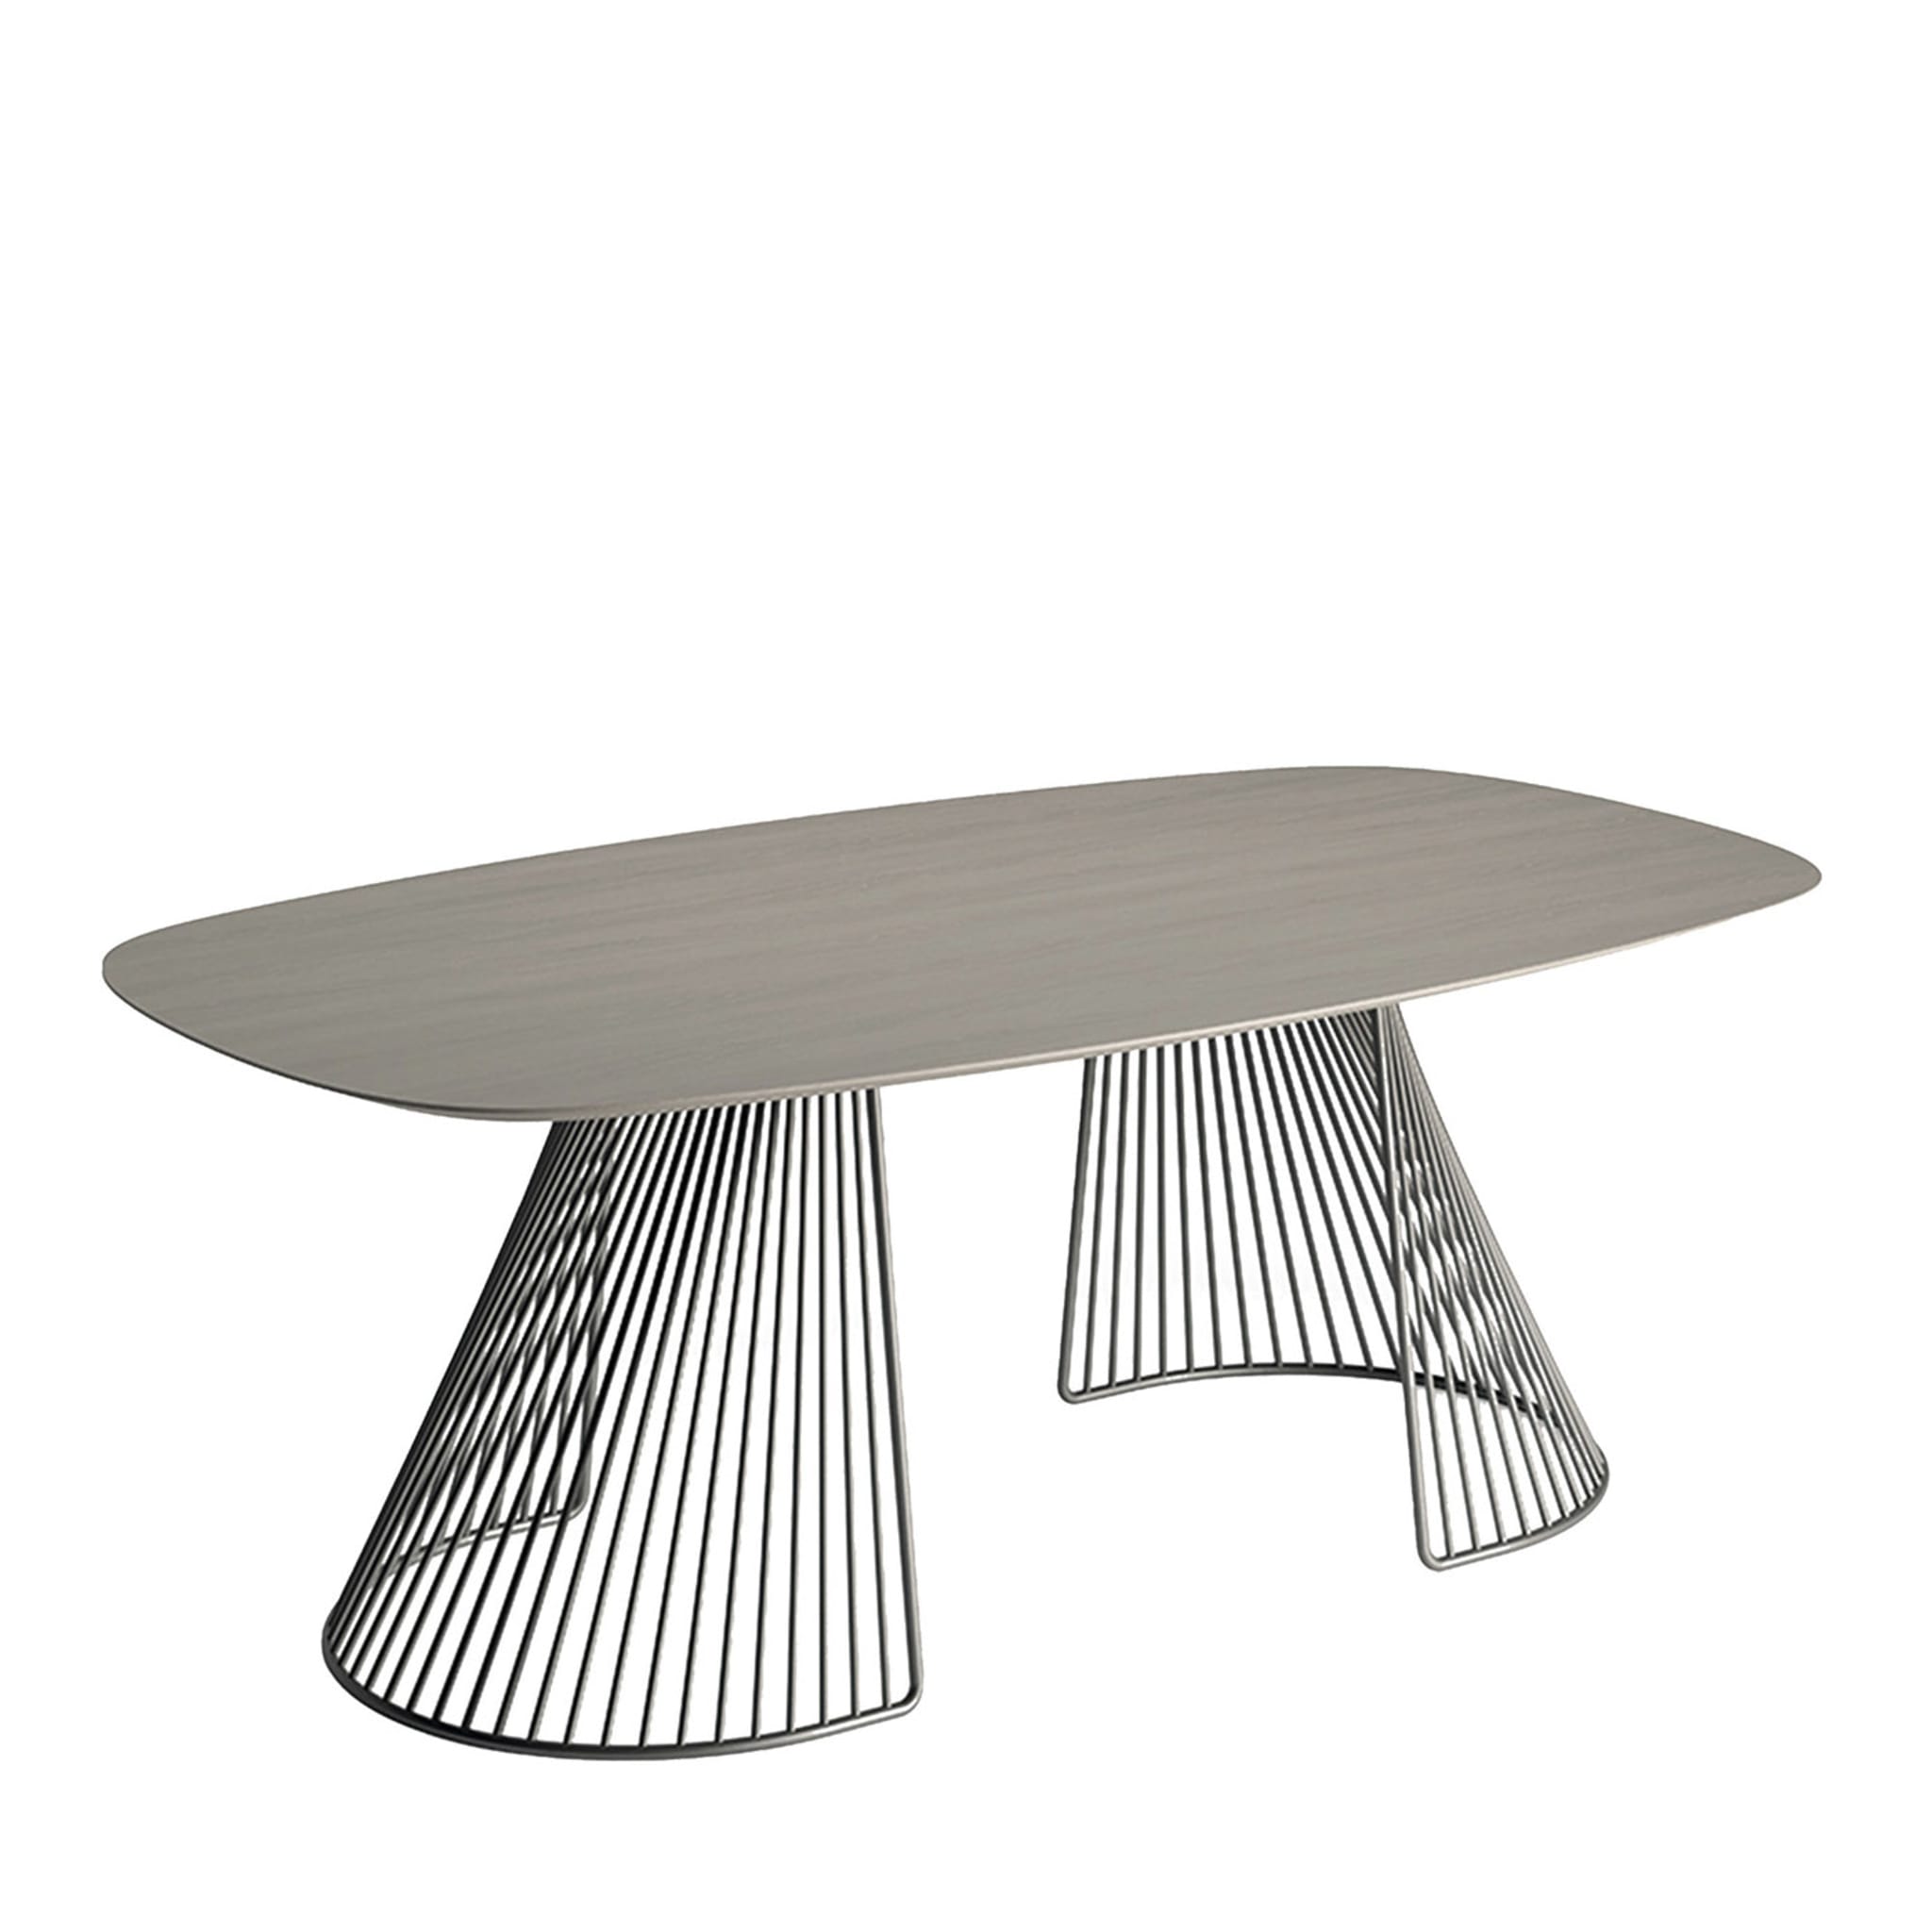 Grid Canadian Durmast Rectangular Table by Ciani Design - Main view